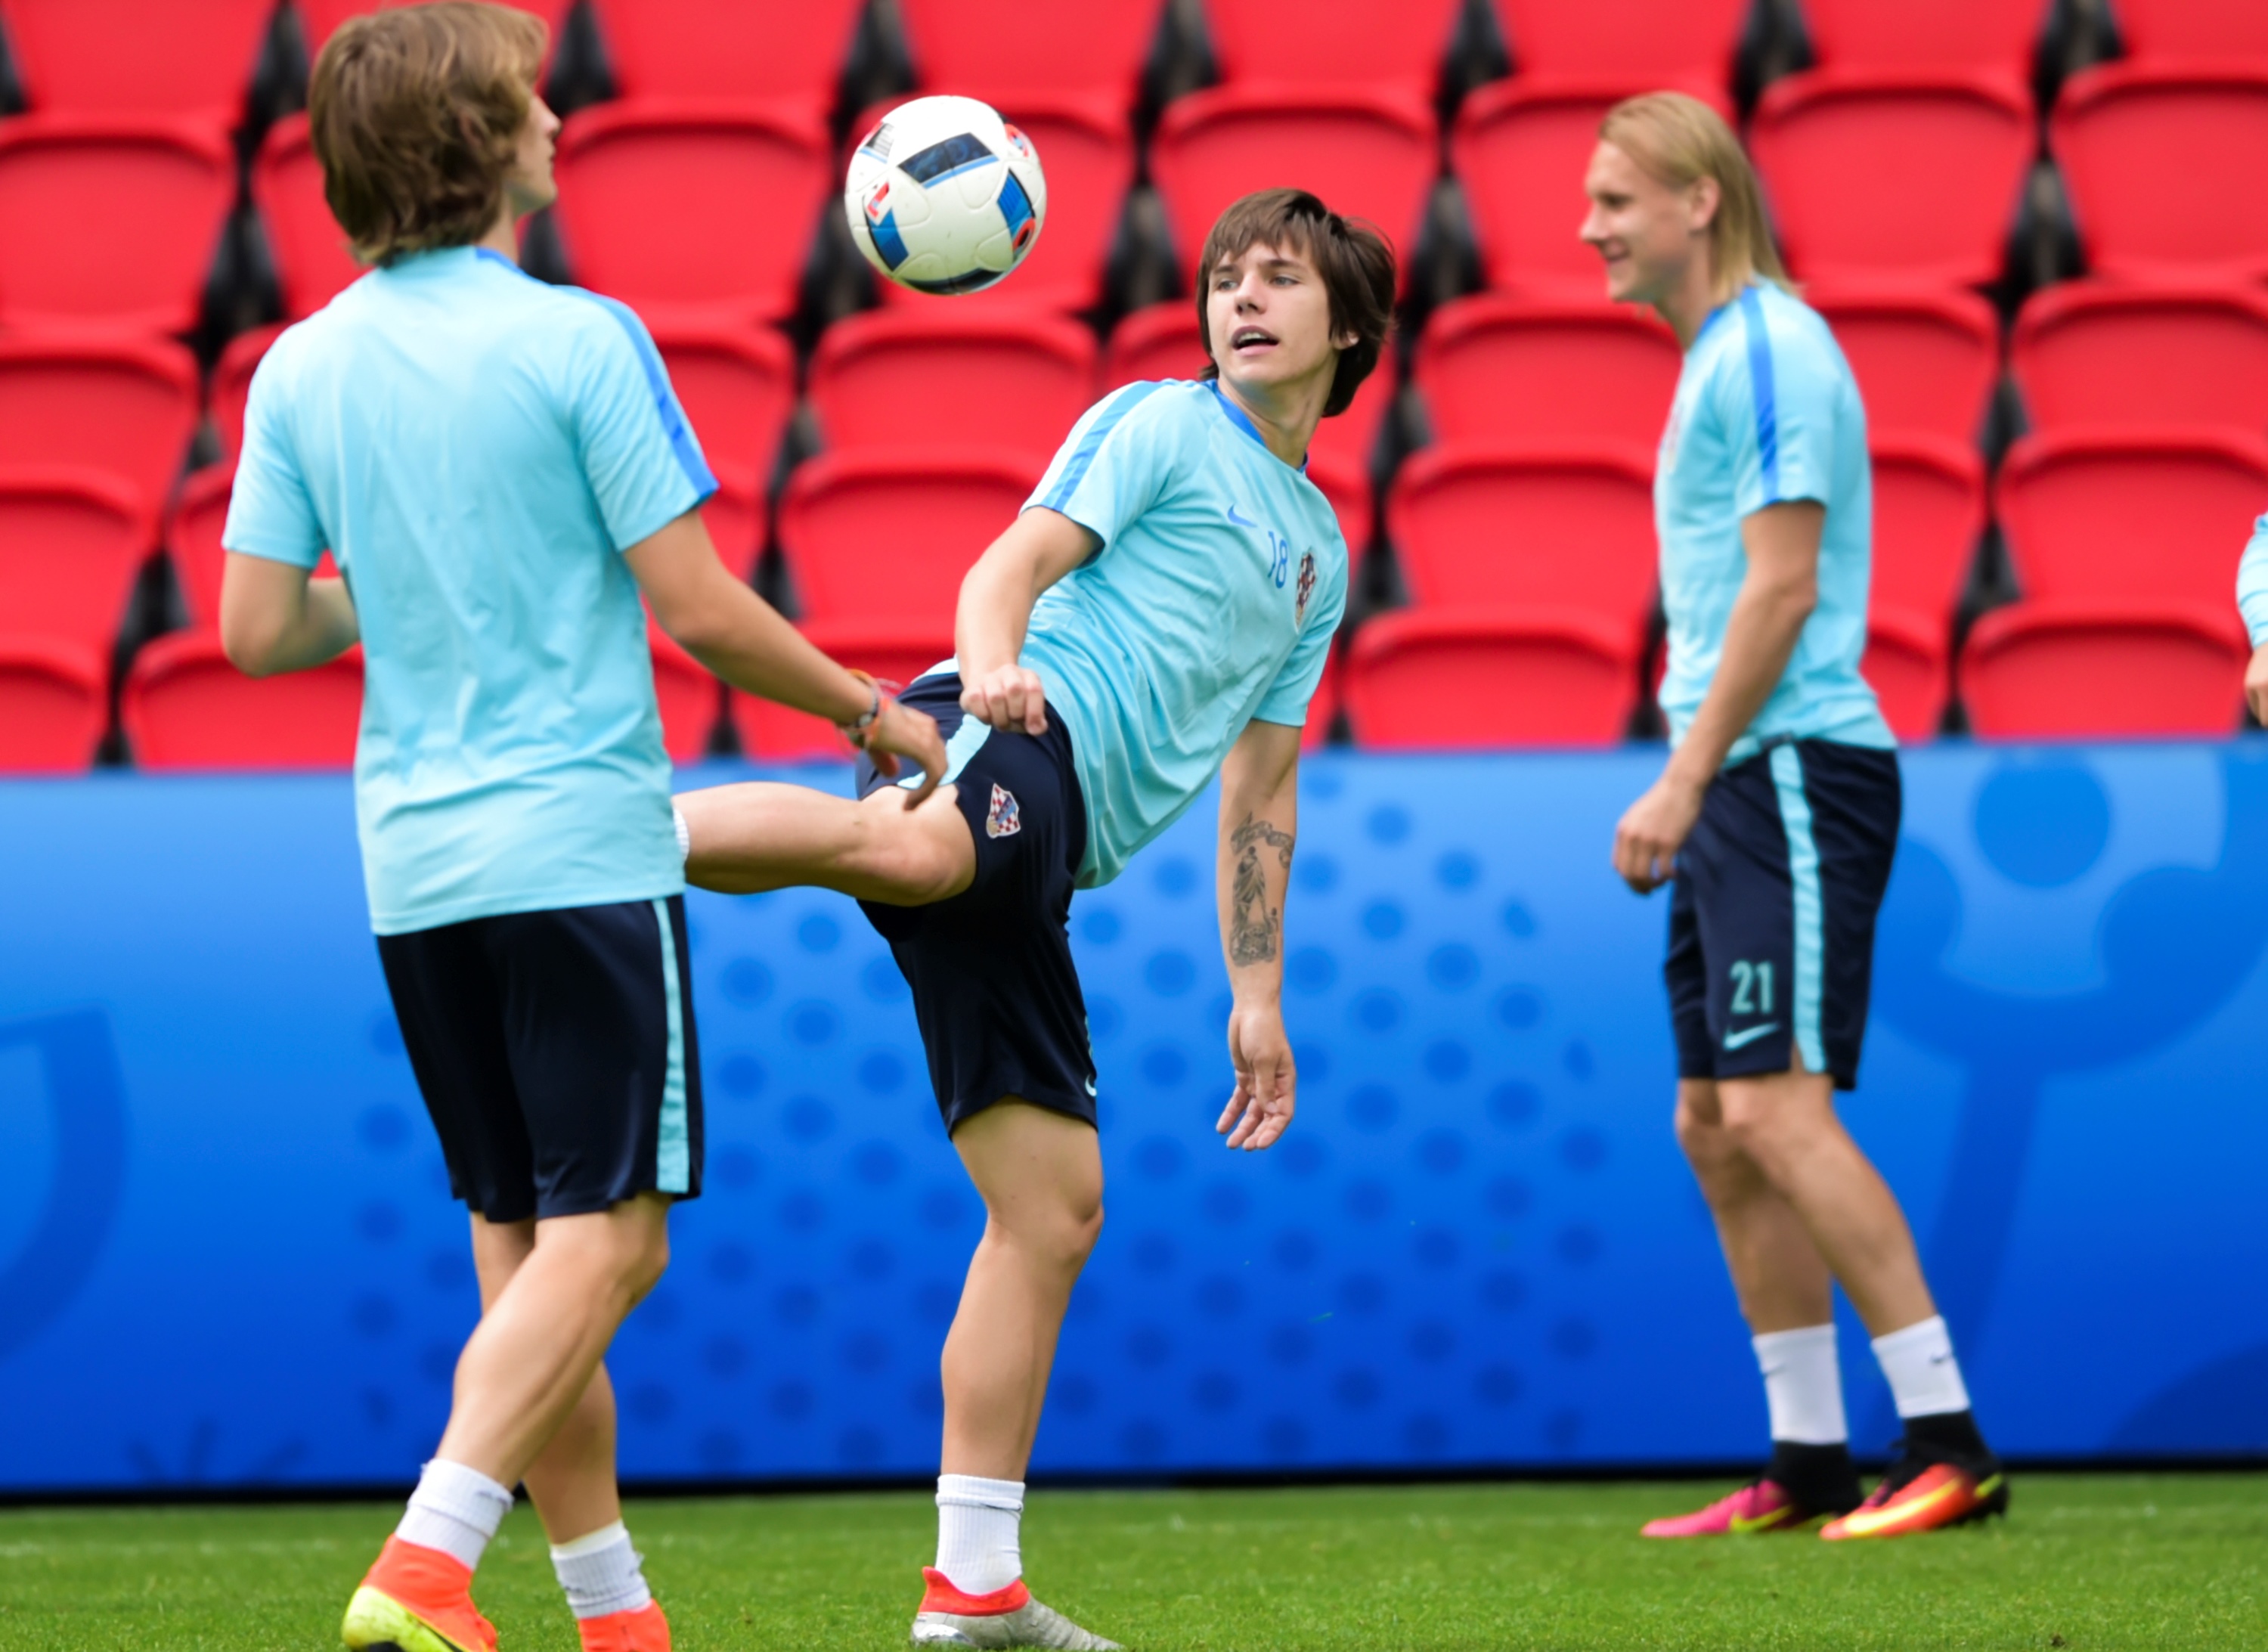 Croatia's  Ante Coric is pictured during a training session on the eve of the team's opening match for the Euro 2016 European football tournament at the Parc des Princes in Paris on June 11, 2016. / AFP / BULENT KILIC        (Photo credit should read BULENT KILIC/AFP/Getty Images)